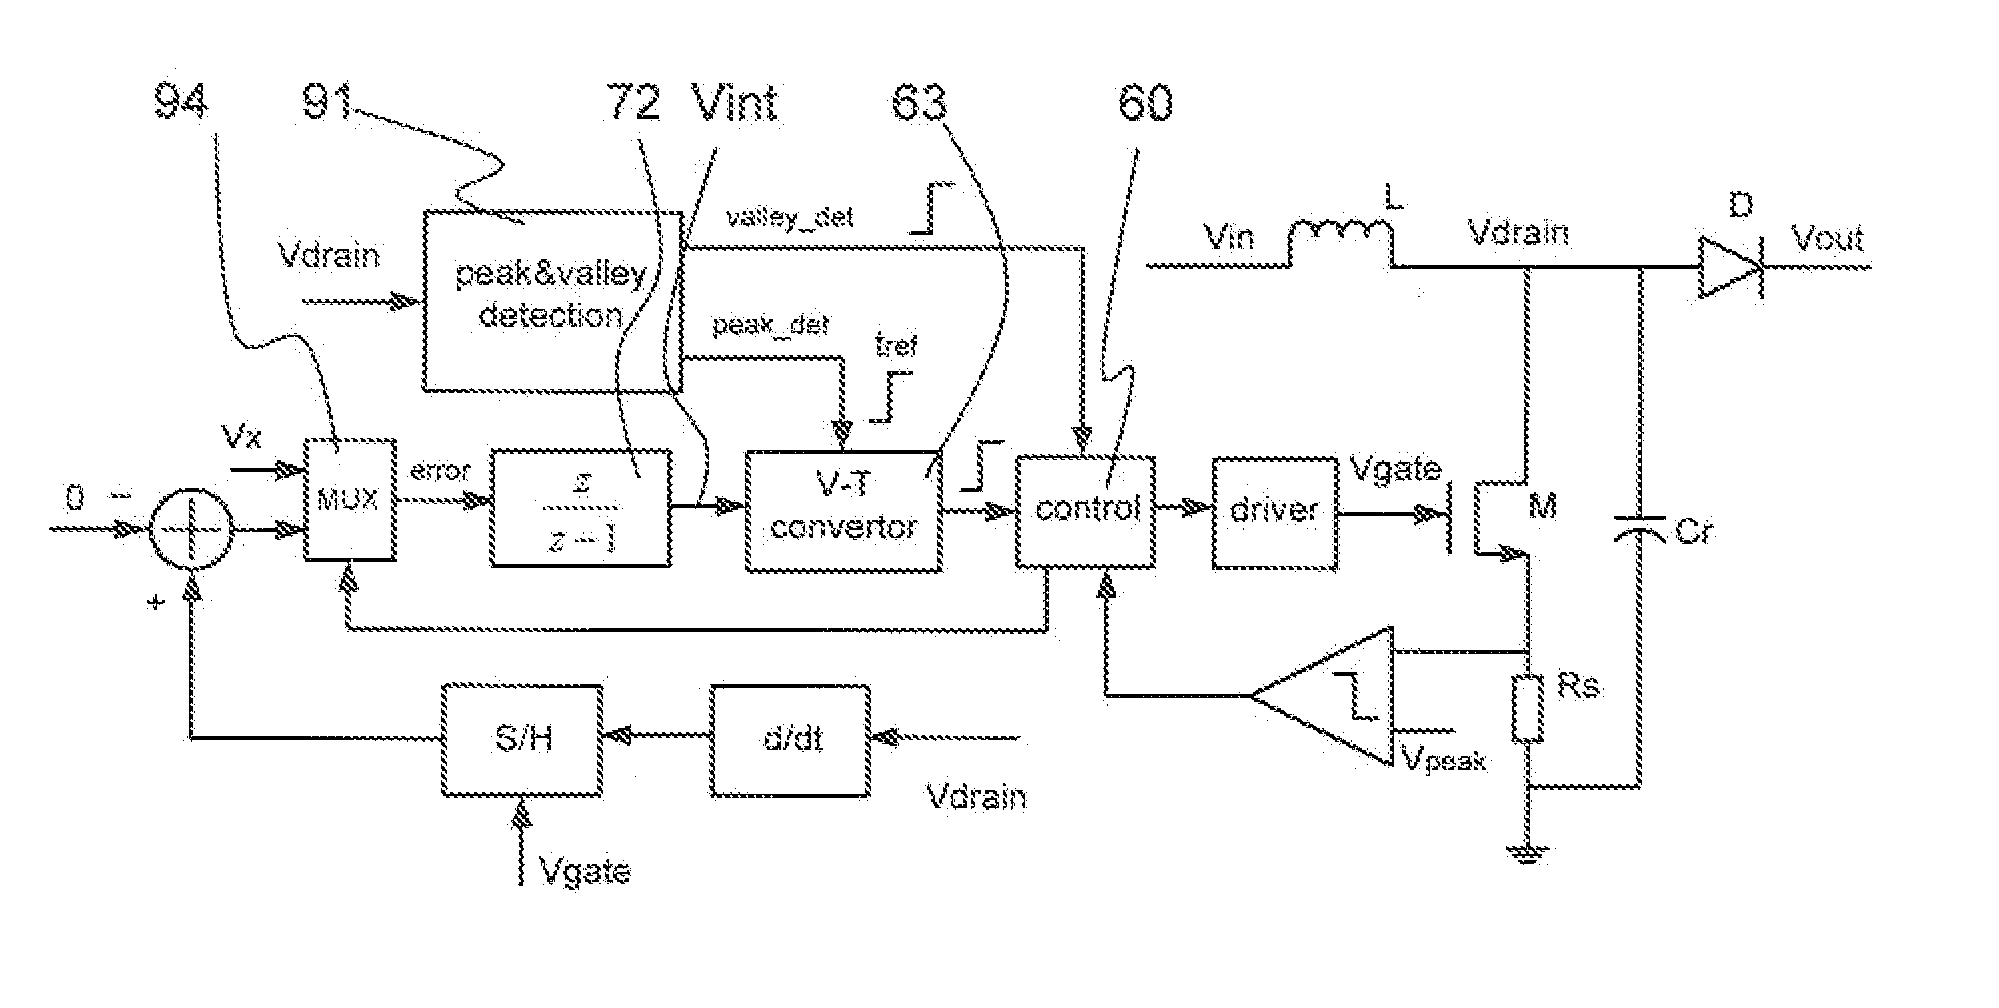 Self-oscillating switched mode converter with valley detection